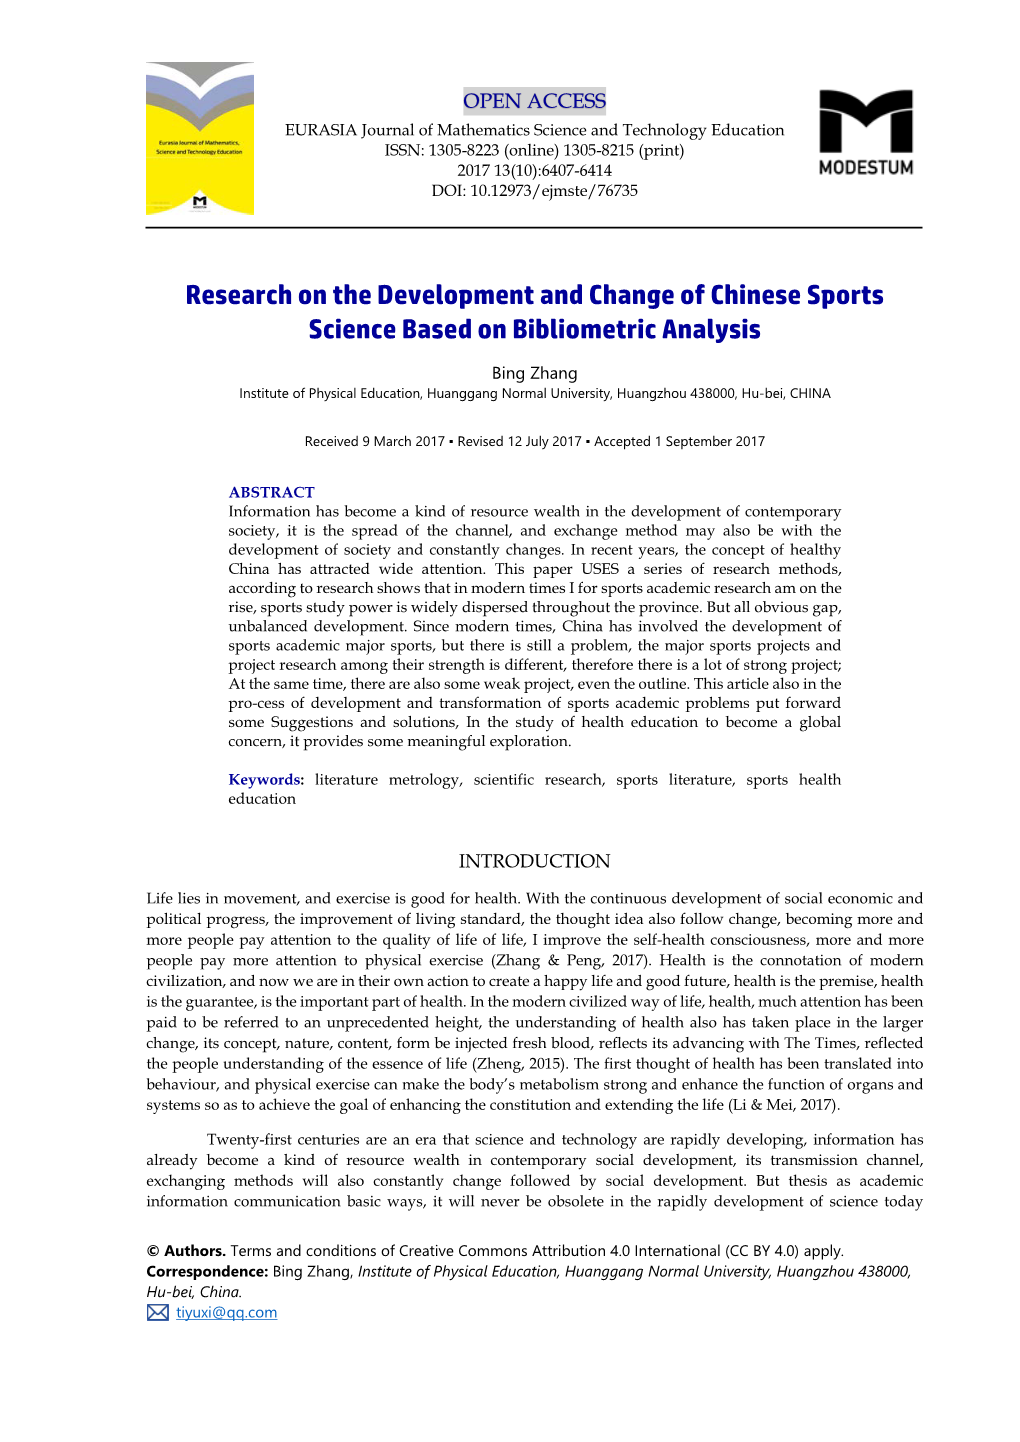 Research on the Development and Change of Chinese Sports Science Based on Bibliometric Analysis